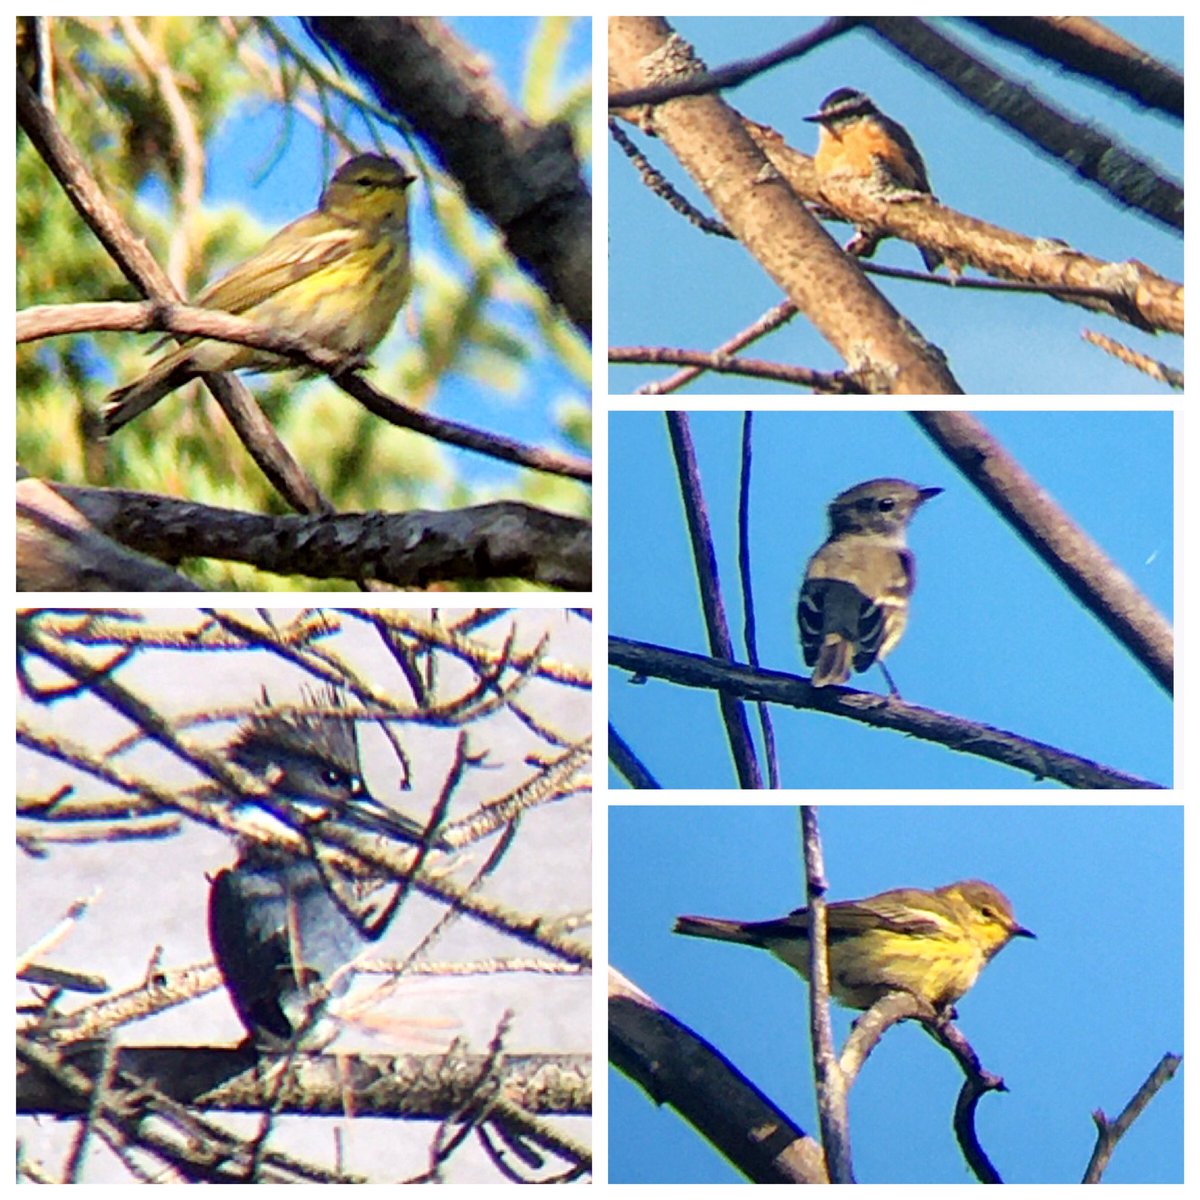 Ontario Place bird notes #38 | Feels too early for autumnal signs but definitely more migratory birds around  Cape May & Blackburnian Warblers, lots of Red-breasted Nuthatches, a loud Belted Kingfisher, Willow Flycatcher, Warbling Vireos, & hundreds of Double-crested Cormorants